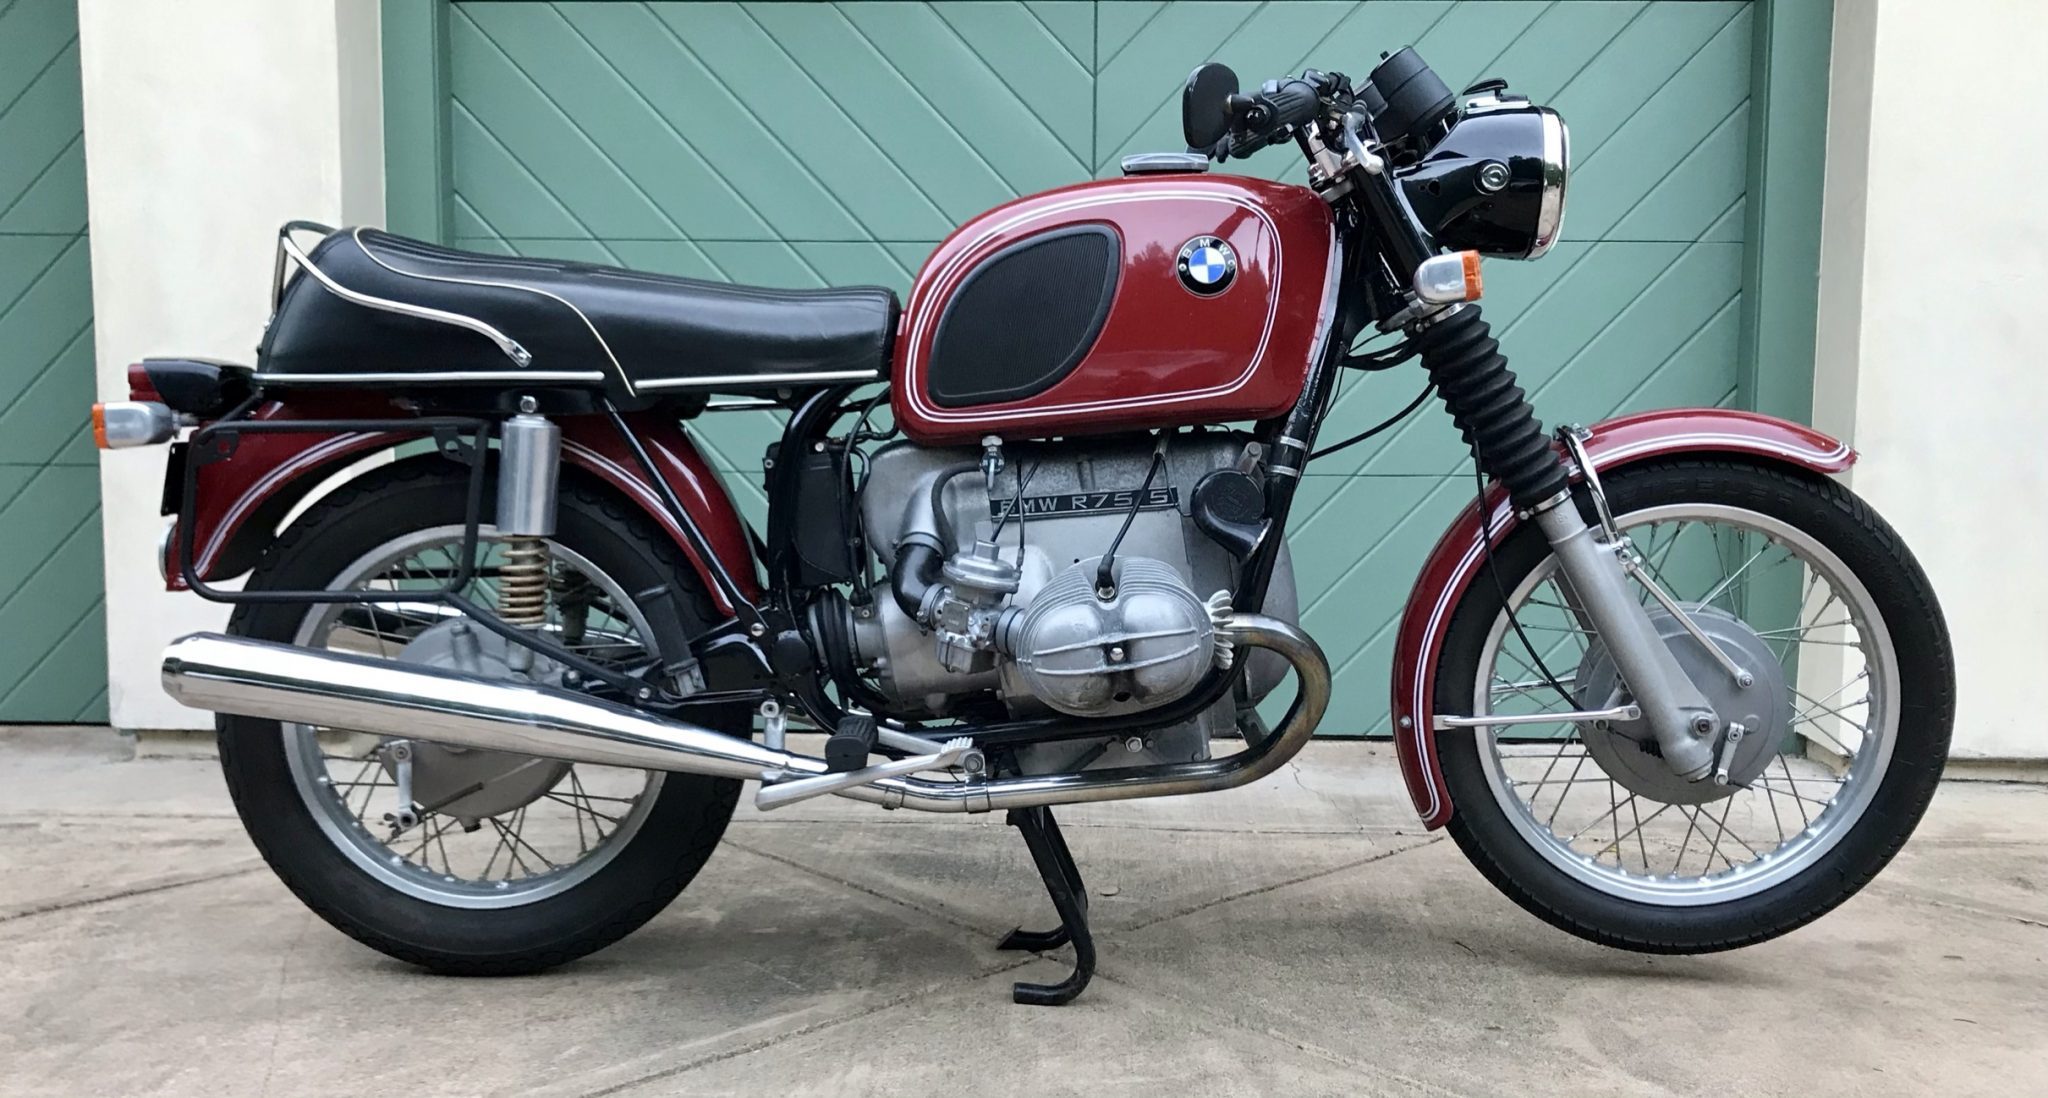 4 Sale / 1973 BMW R75/5: Keeping it in the family - Adventure Rider | Motor Memos